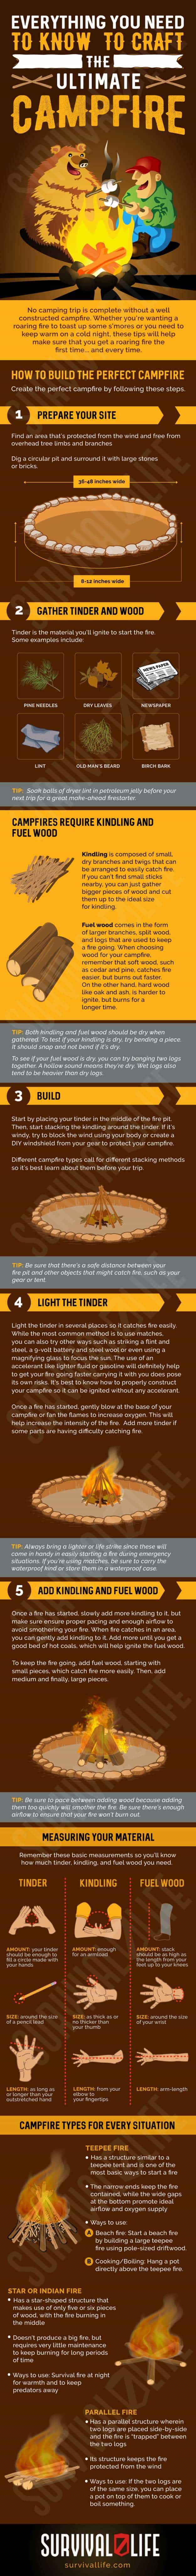 Campfire Infographic | How To Build The Perfect Campfire